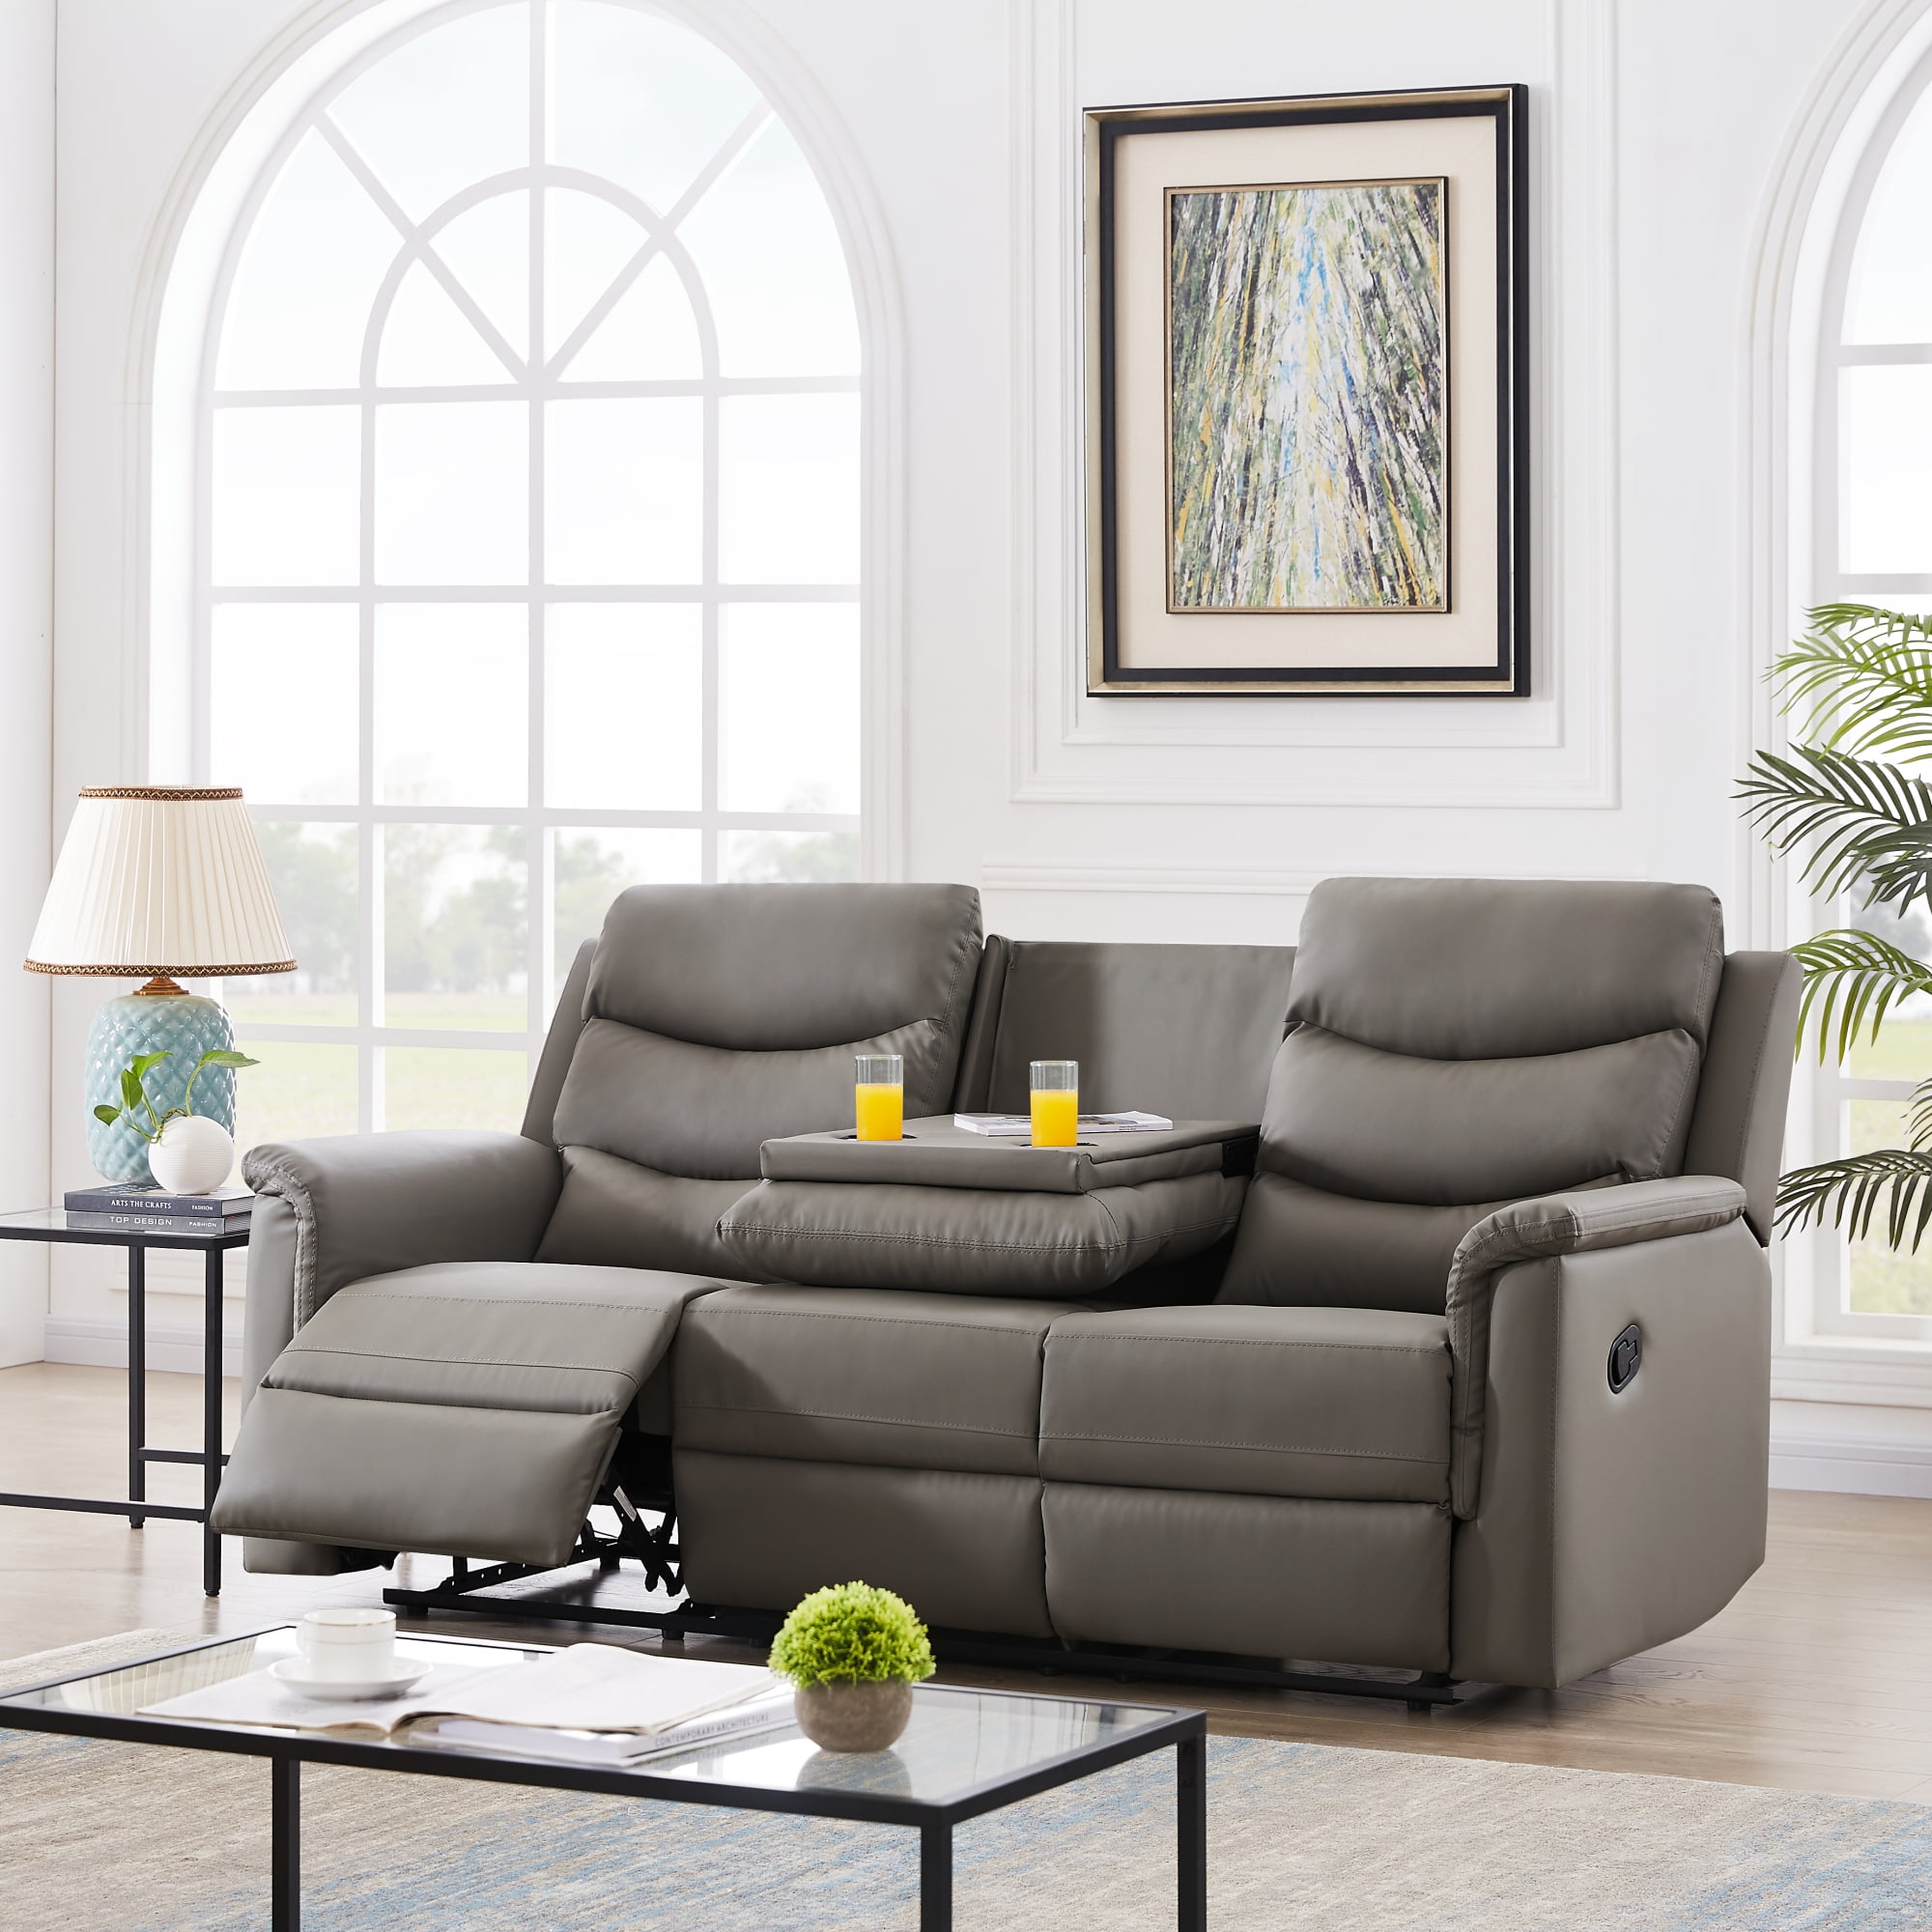 Modstyle Reclining Sofa Couch with Console & Cup Holders, PU Leather Gray | Ecksofas